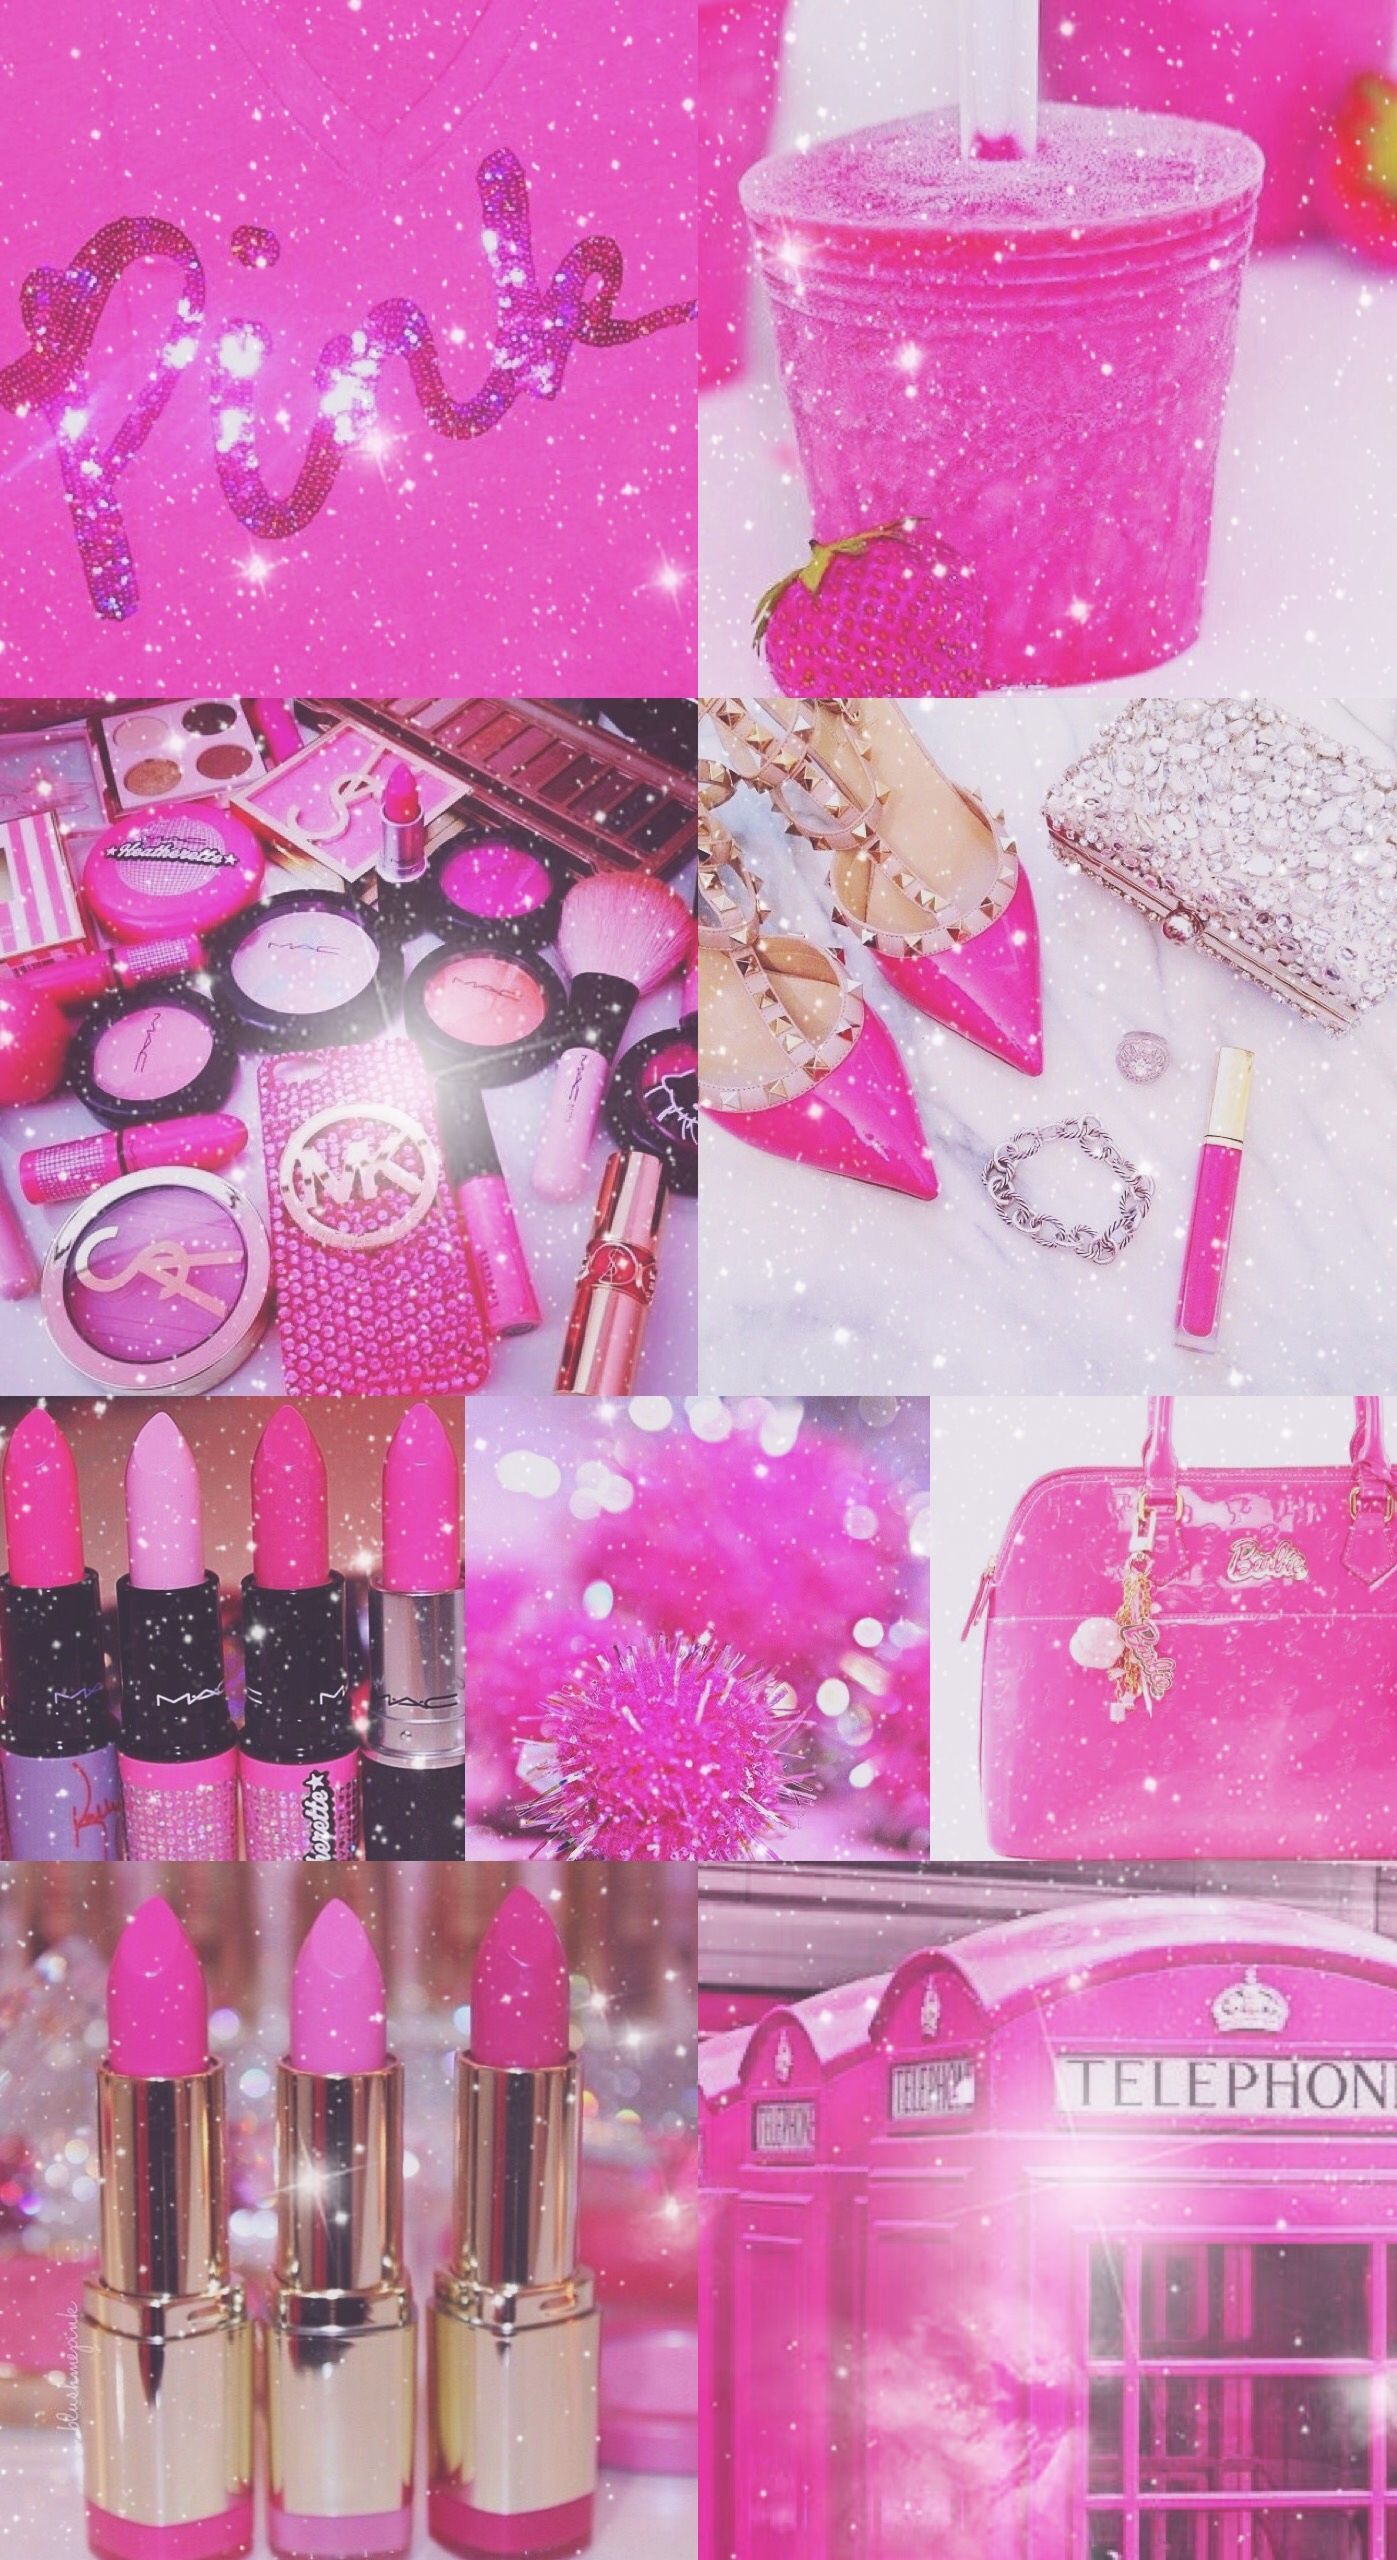 Pretty💖Girl Things on Tumblr: Image tagged with girly things, sparkles,  sparkling